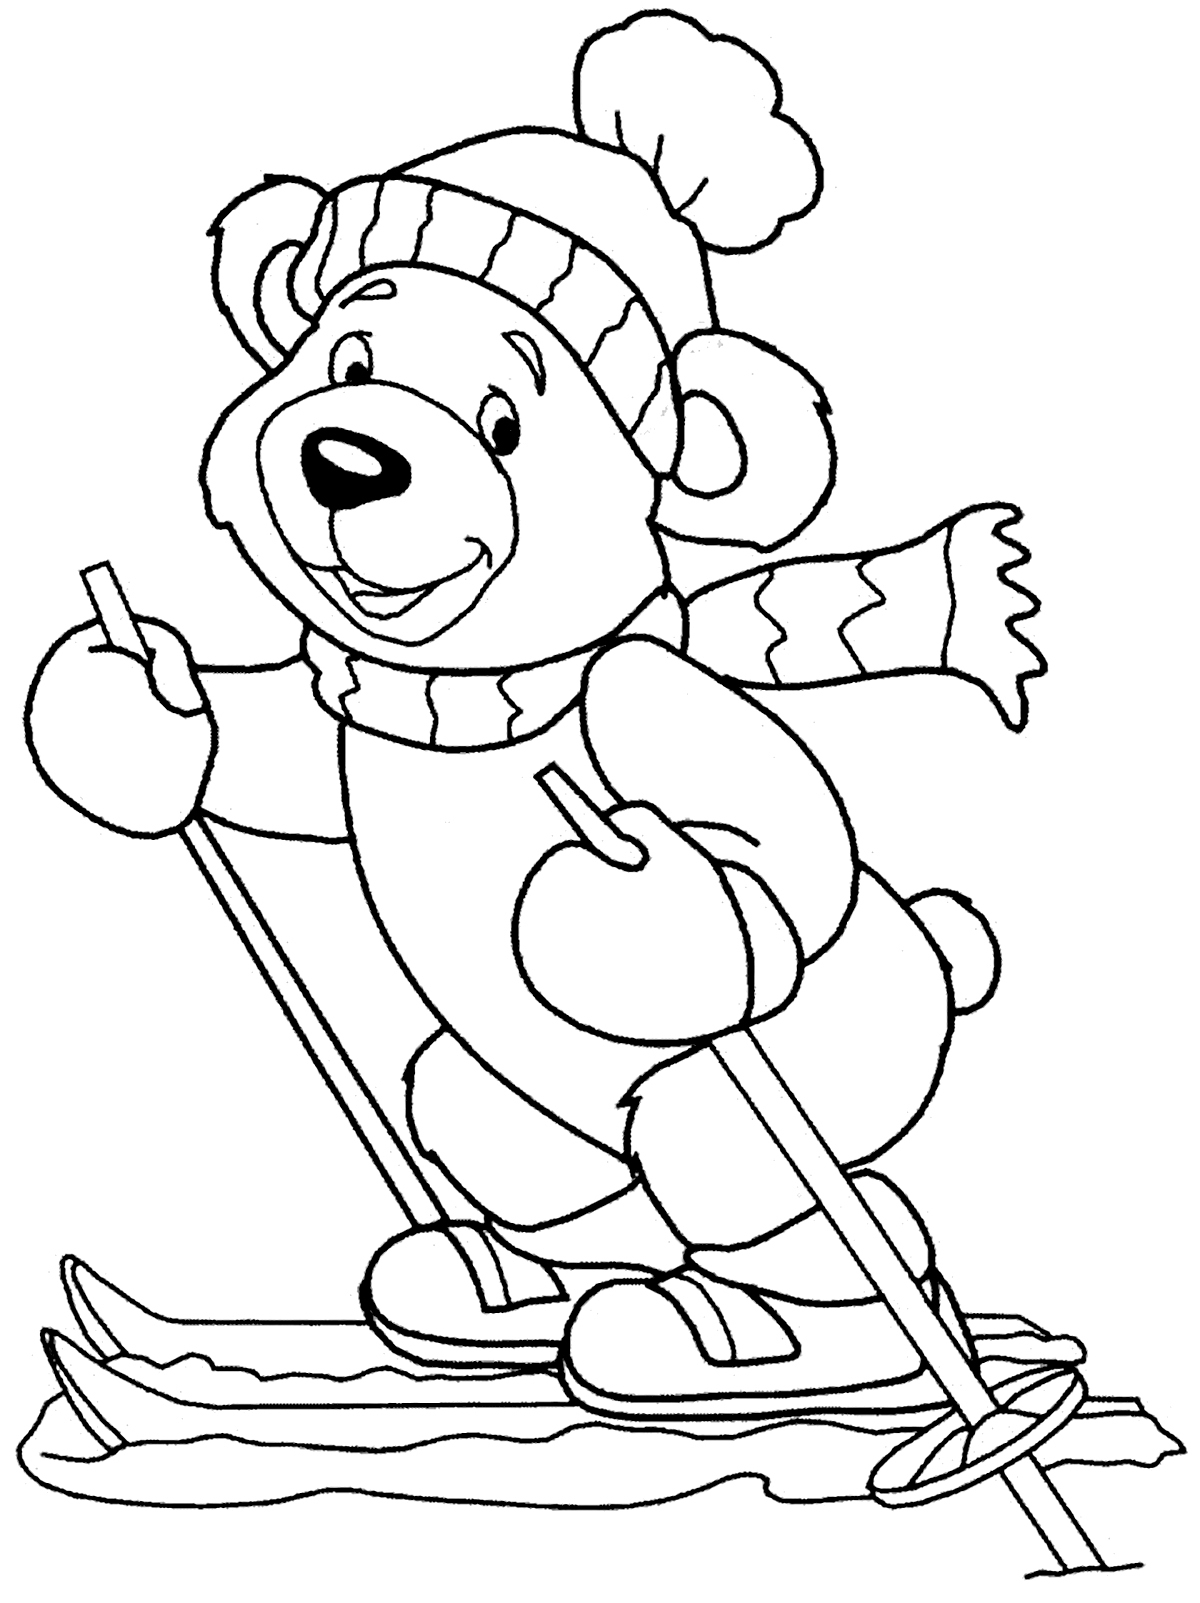 Bears Coloring Pages Bears To Color For Children Bears Kids Coloring Pages